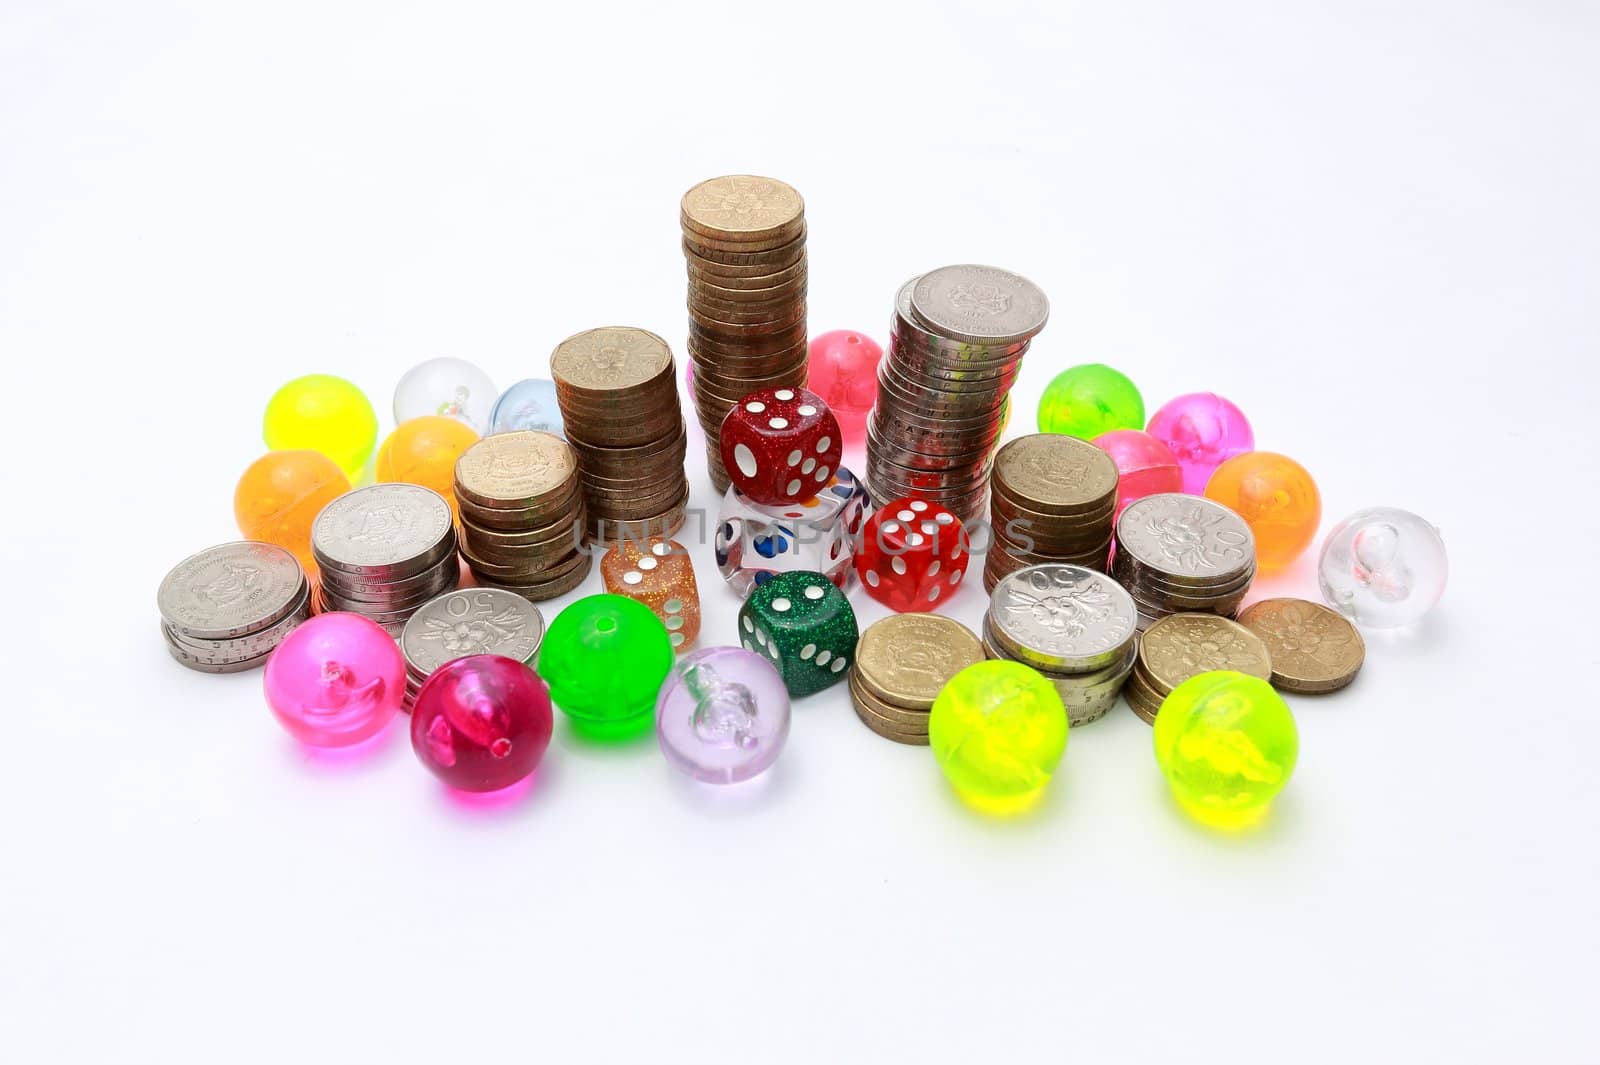 Dices surrounded by coins and colourful balls